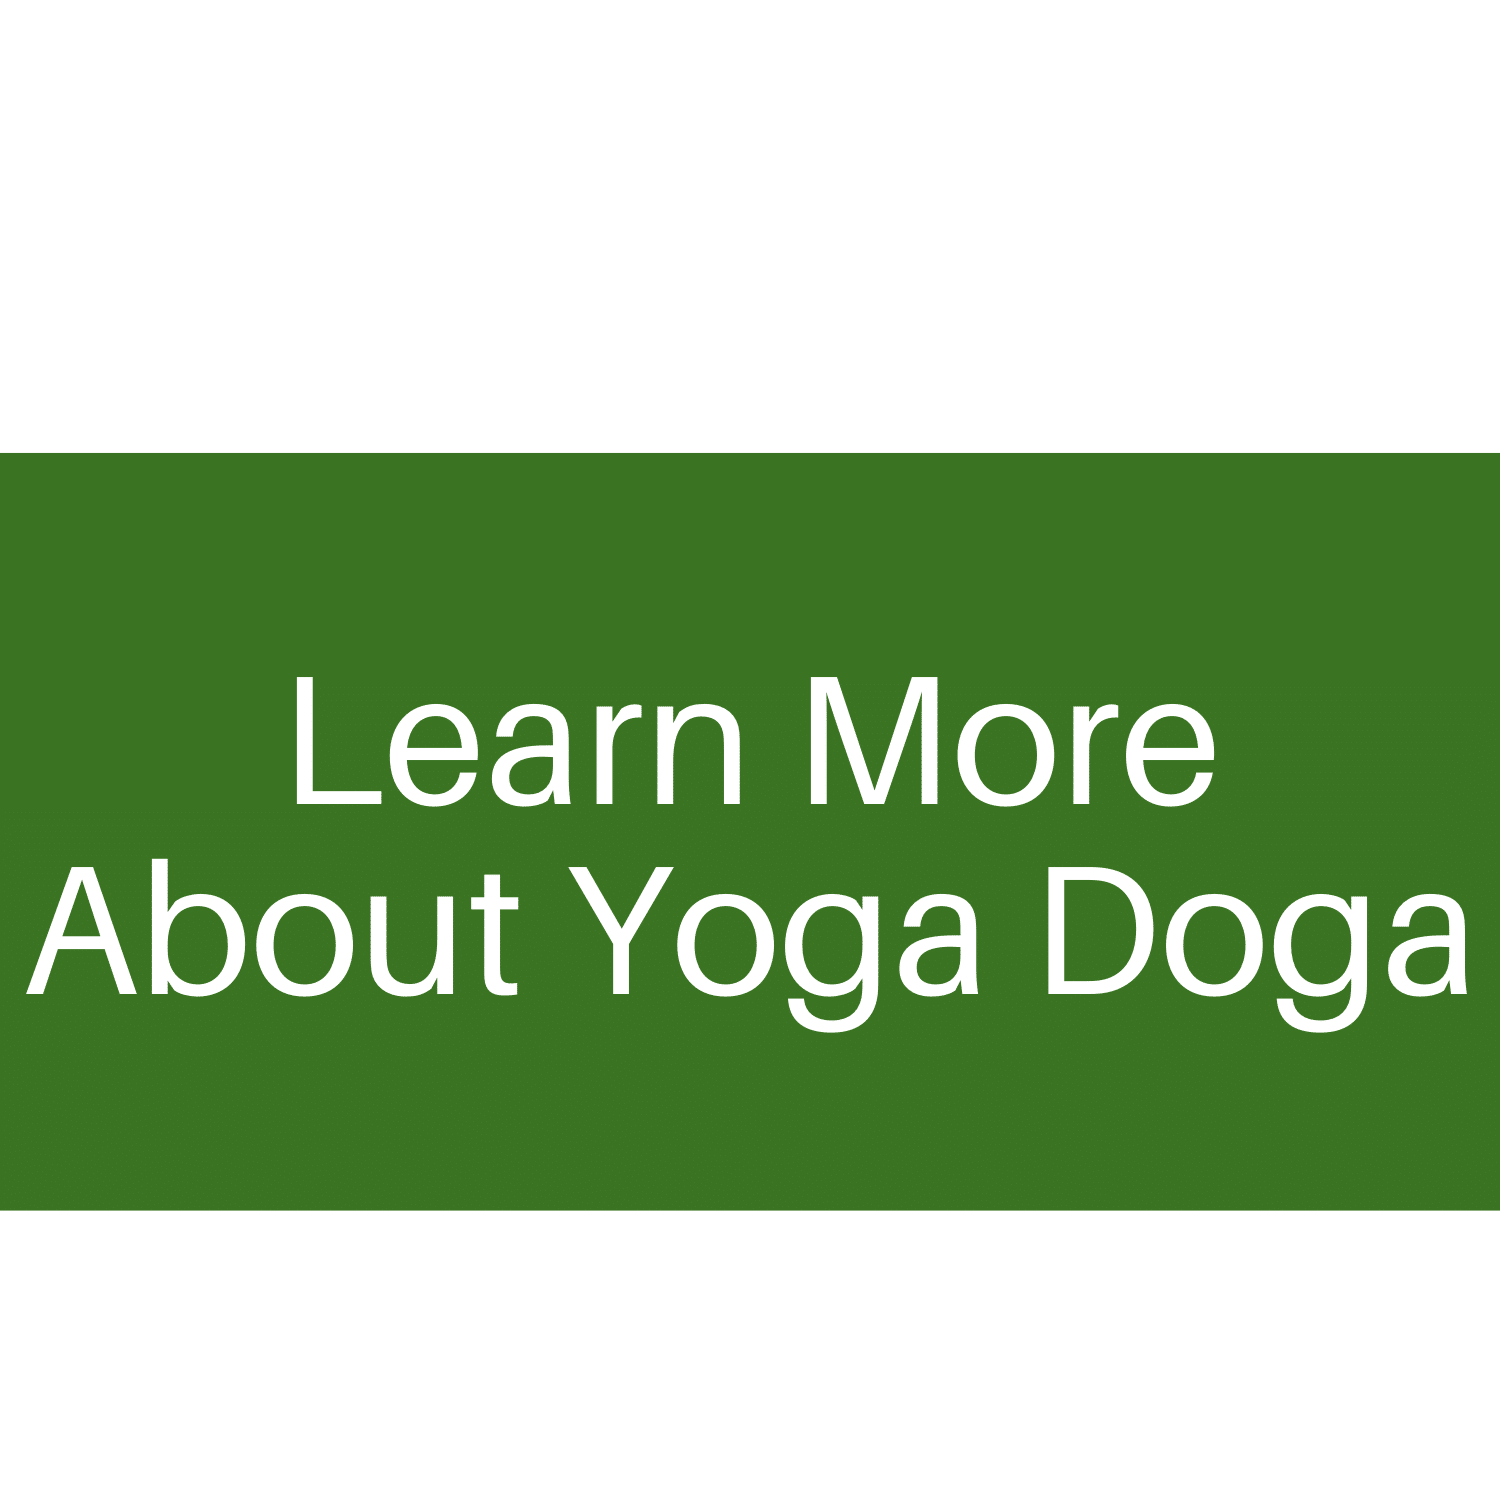 Learn More About Yoga Doga